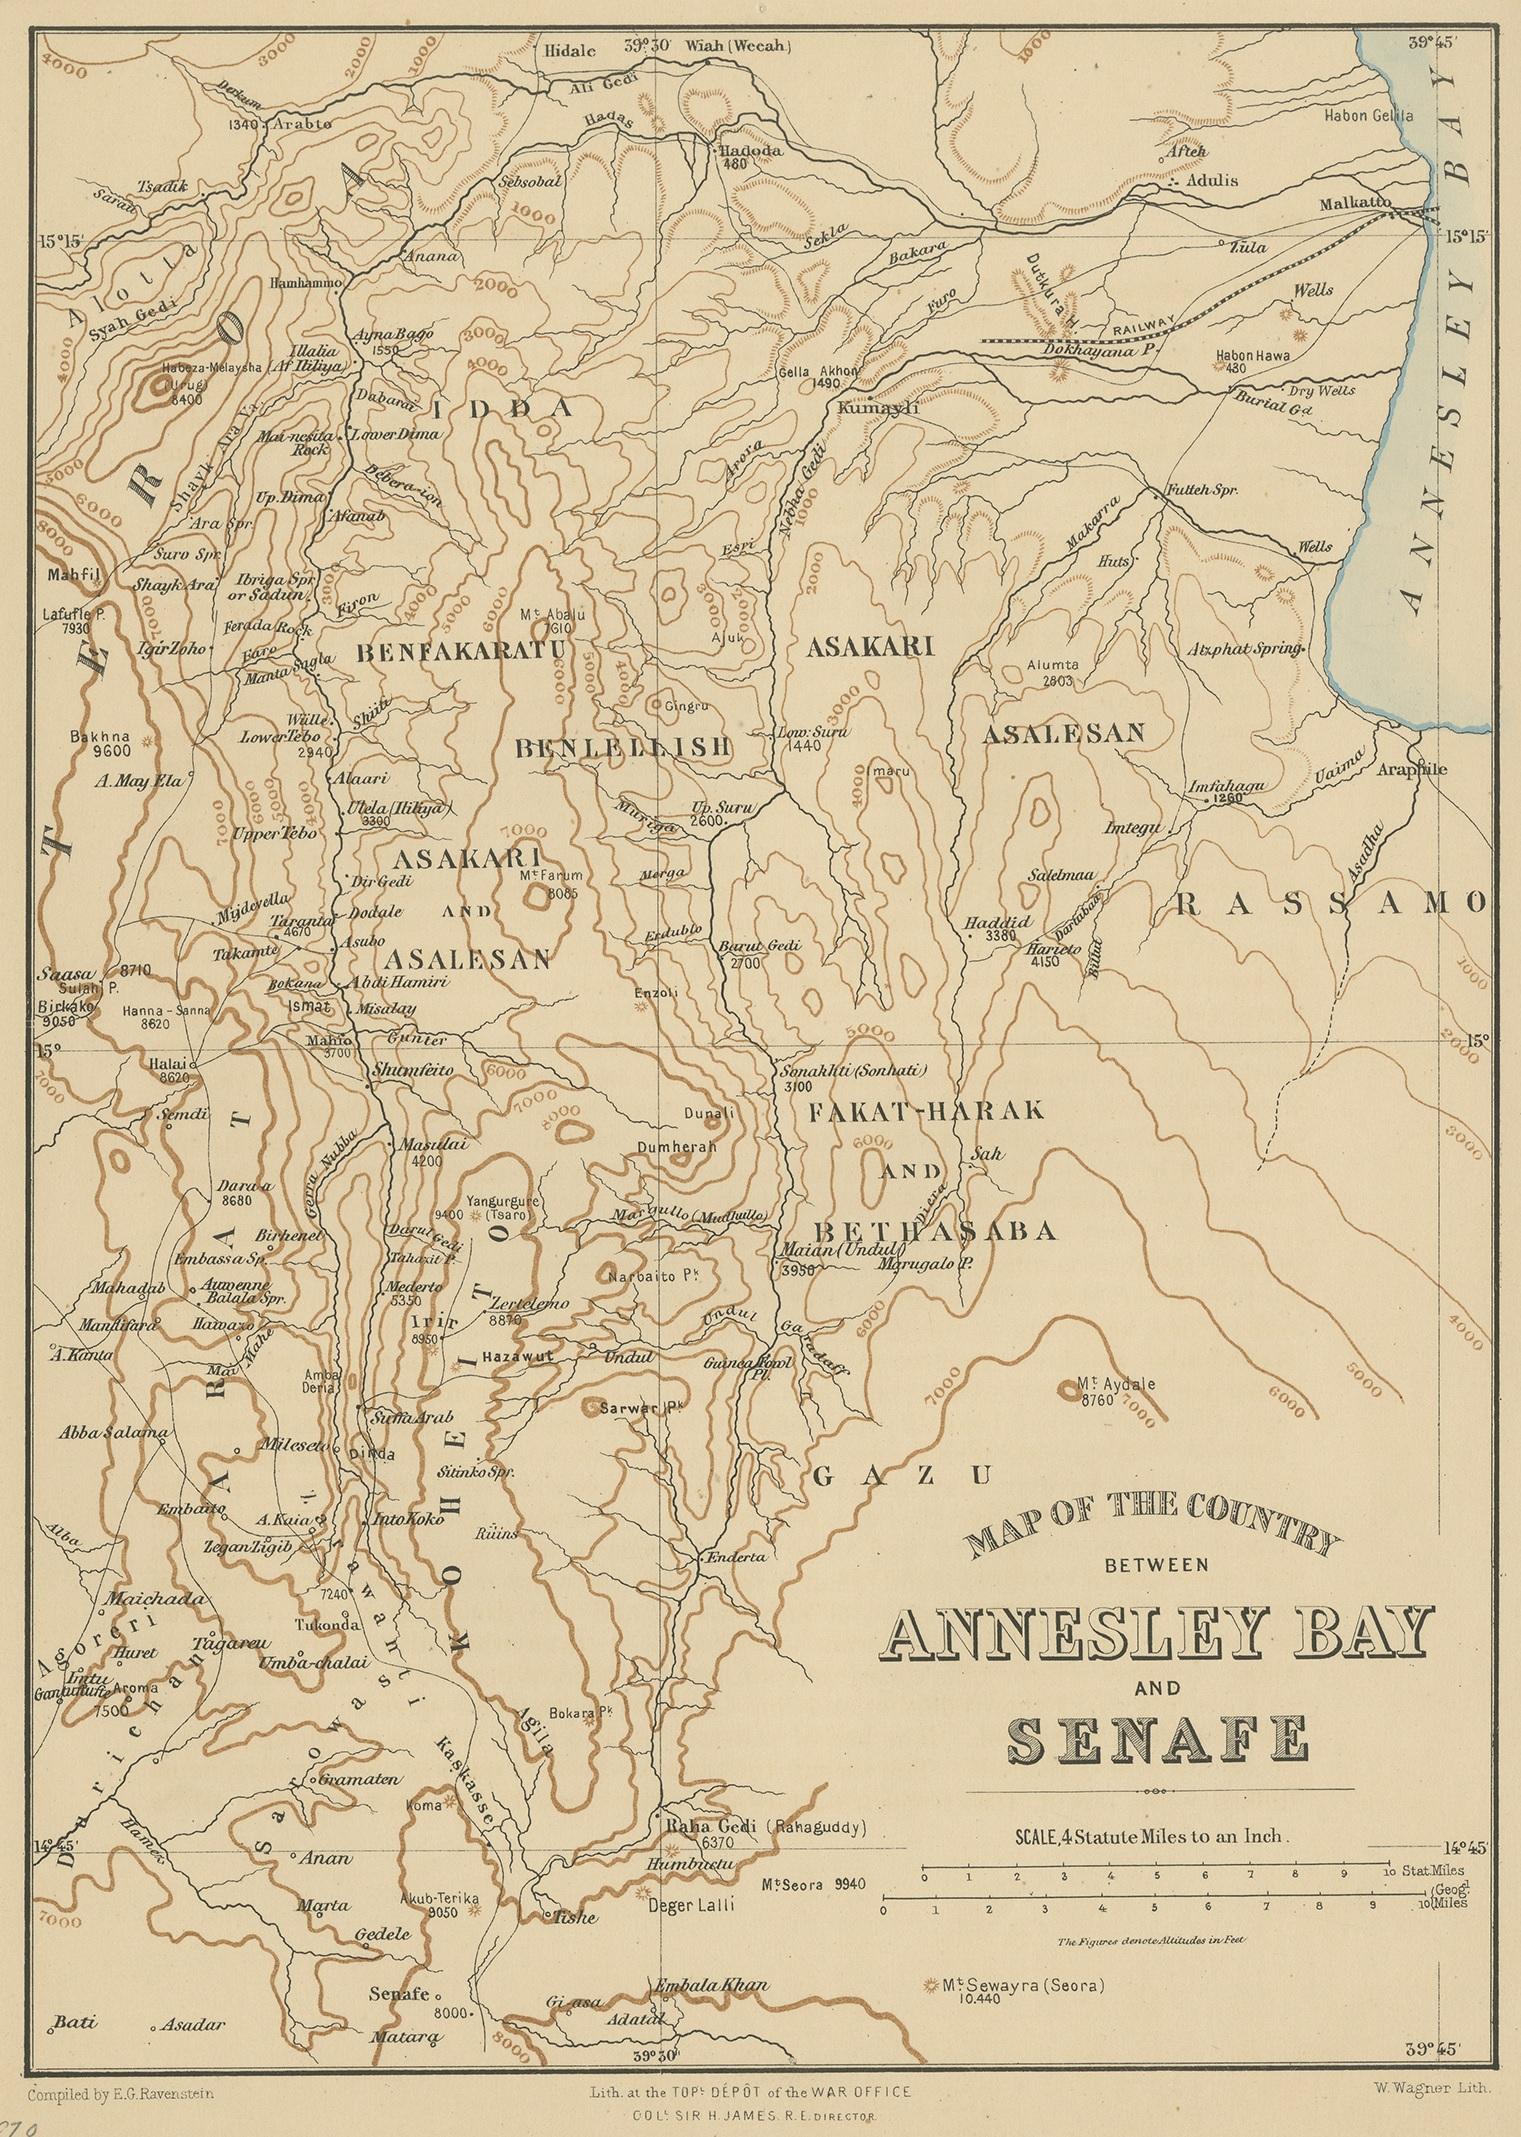 Antique print titled 'Map of the Country between Annesley Bay and Senafe'. Map of the region near Annesley Bay (Gulf of Zula, Bay of Arafali), Eritrea, Africa. The bay is located about 30 miles south of the modern day Eritrean city of Massawa. This